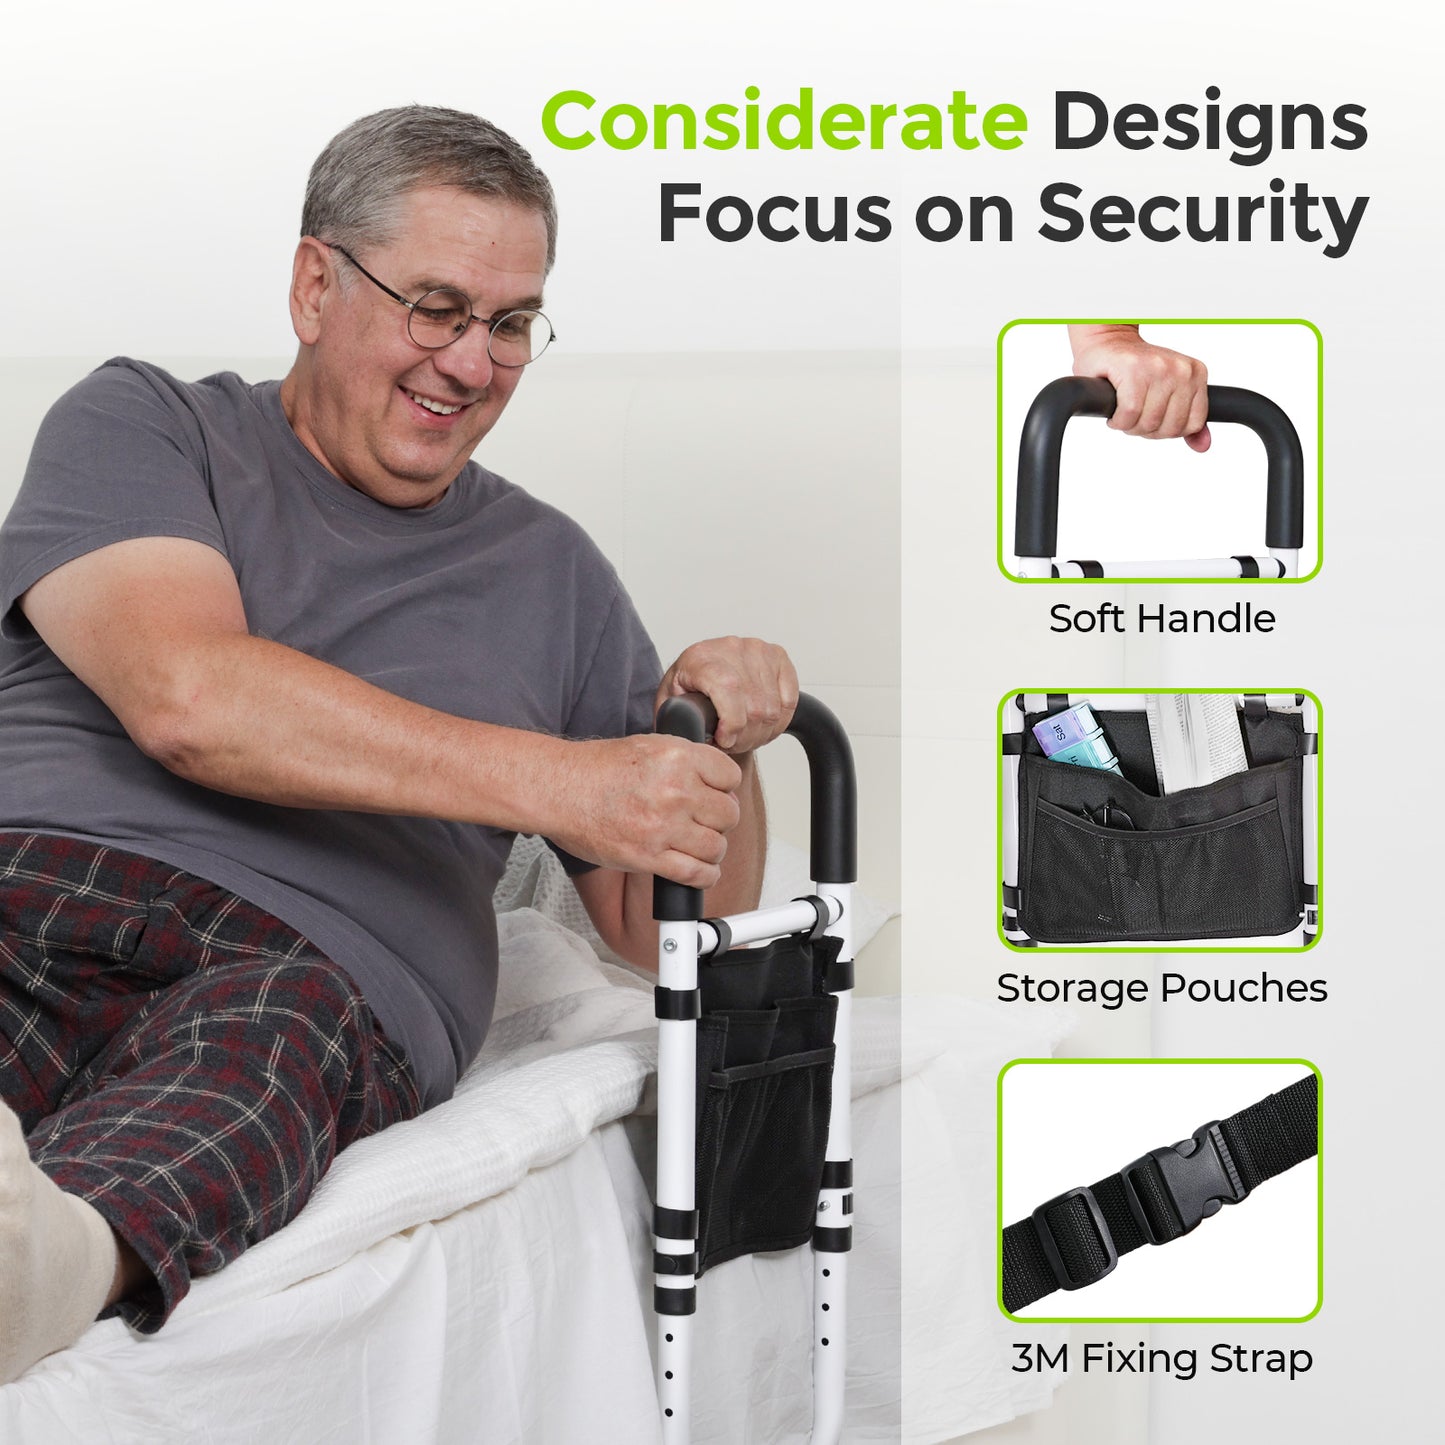 AUVON Bed Rails for Elderly Adults Safety, Adjustable Bed Assist Rail with Ultra-high Handle & Double Crossbeam Design, Storage-Pocket Bed Guard Ensures Seniors Get in or Out of Bed Safely